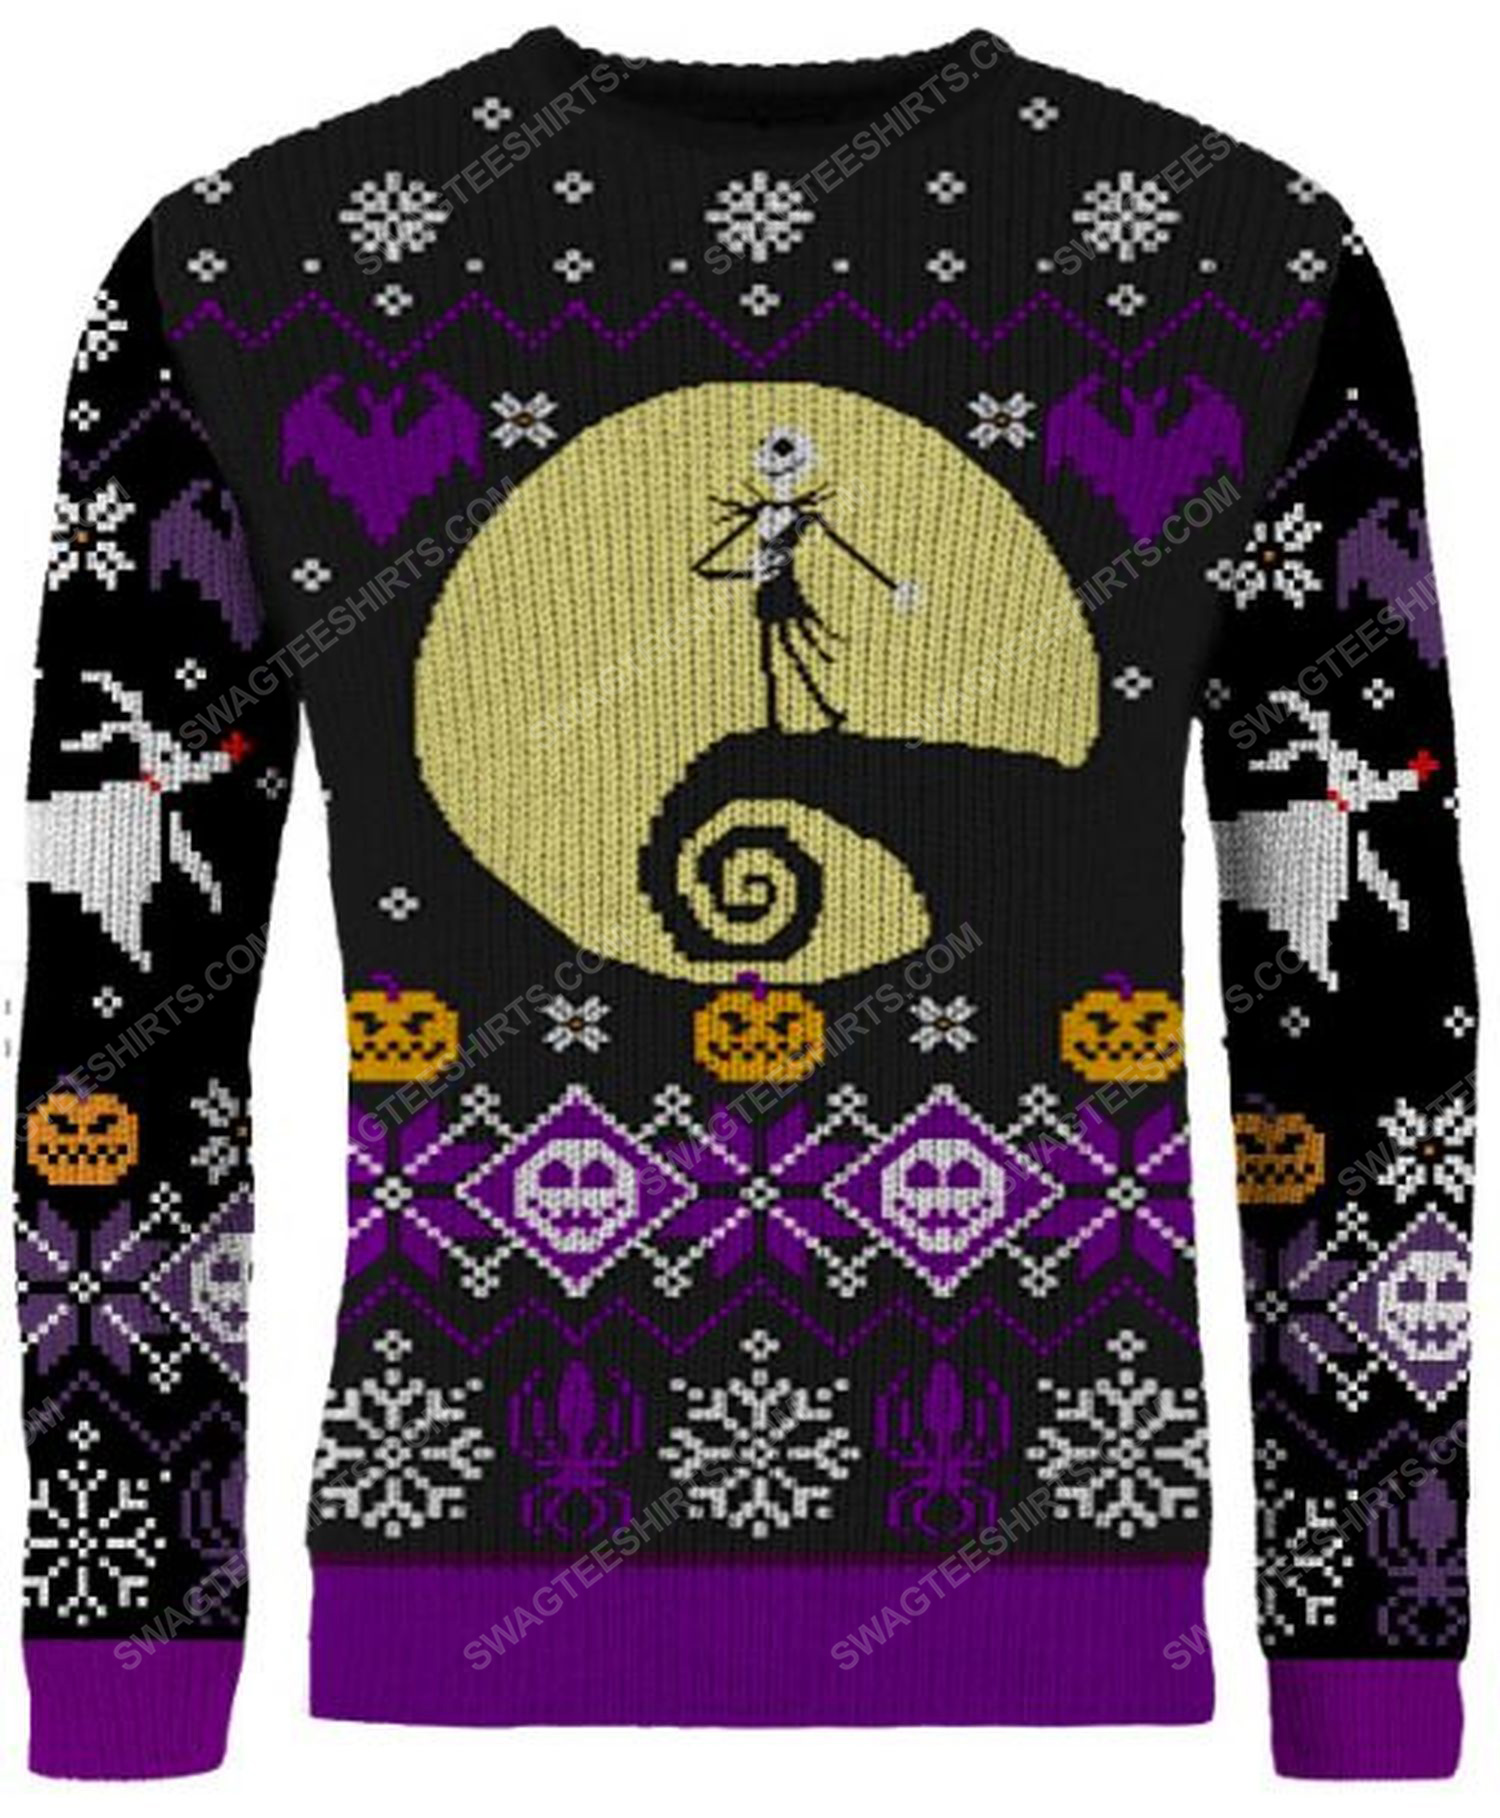 Nightmare before ugly christmas full print ugly christmas sweater 2 - Copy (2)